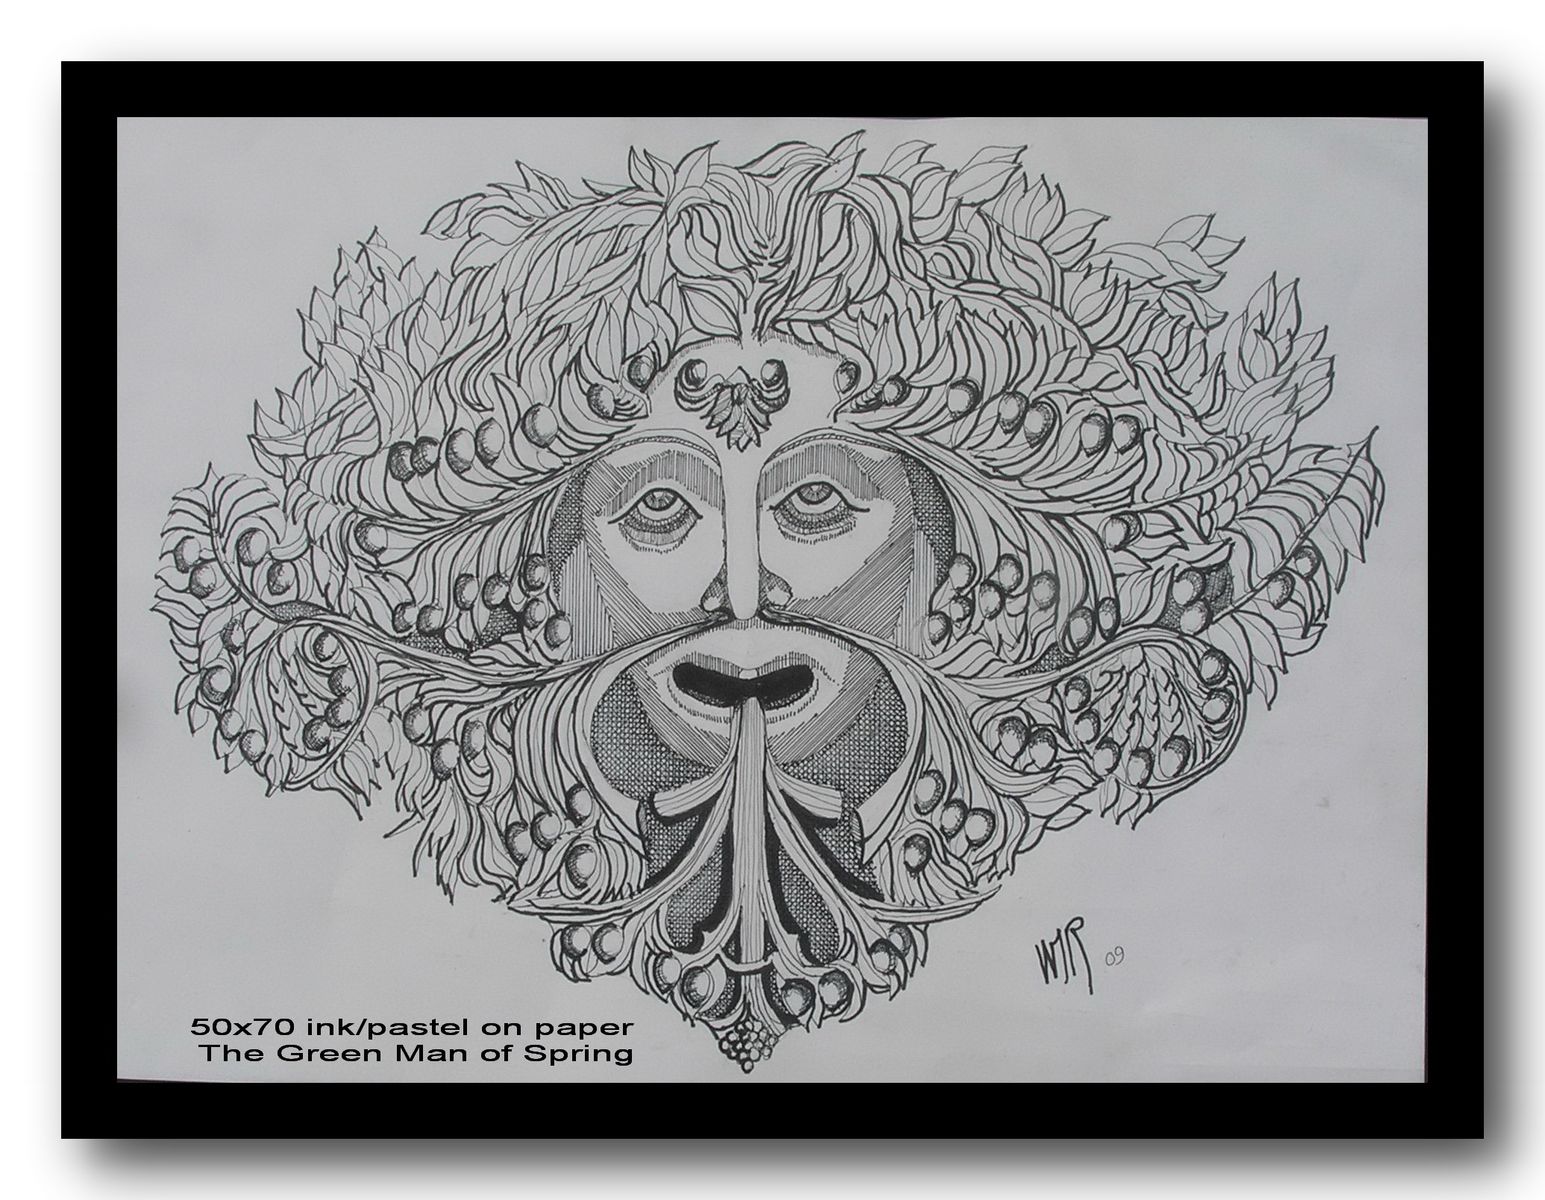 The Green Man of Spring